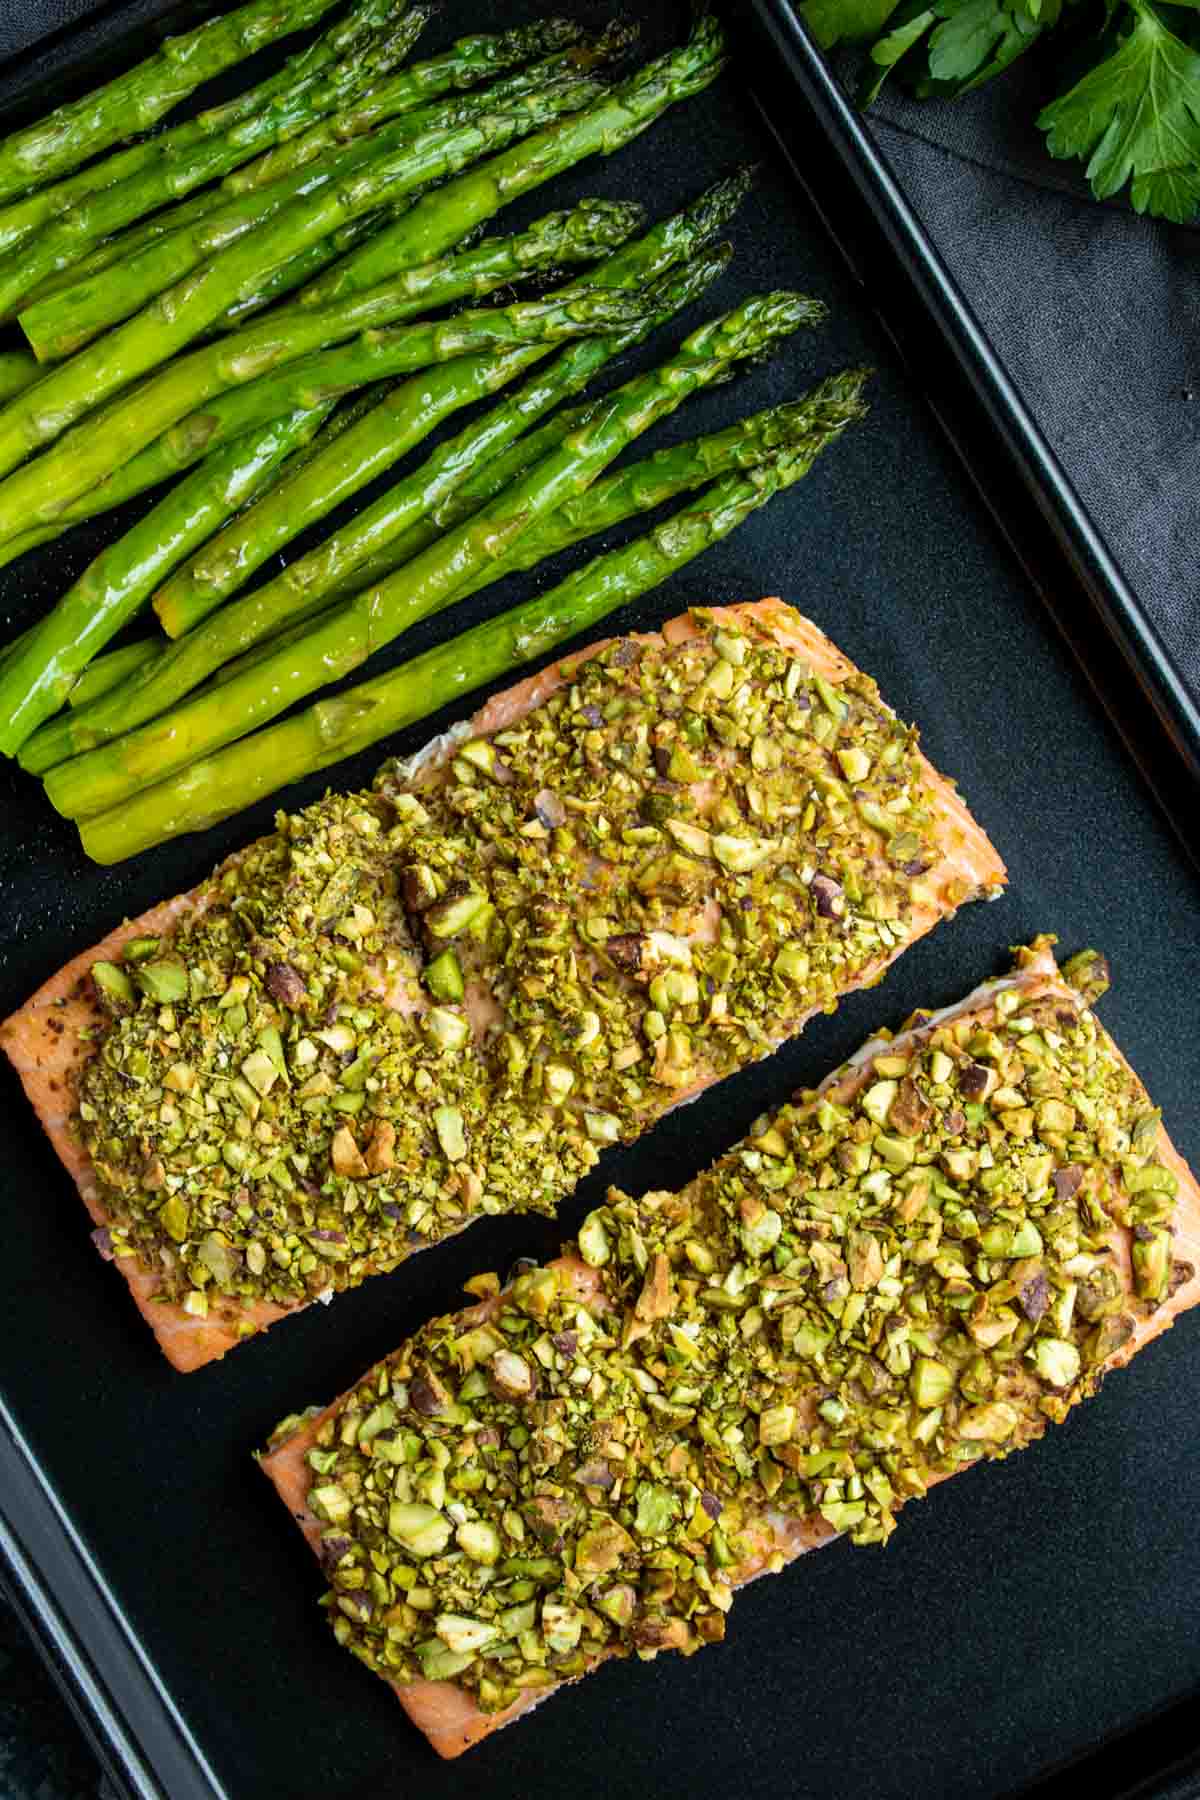 Pistachio crusted salmon on a sheet pan with asparagus